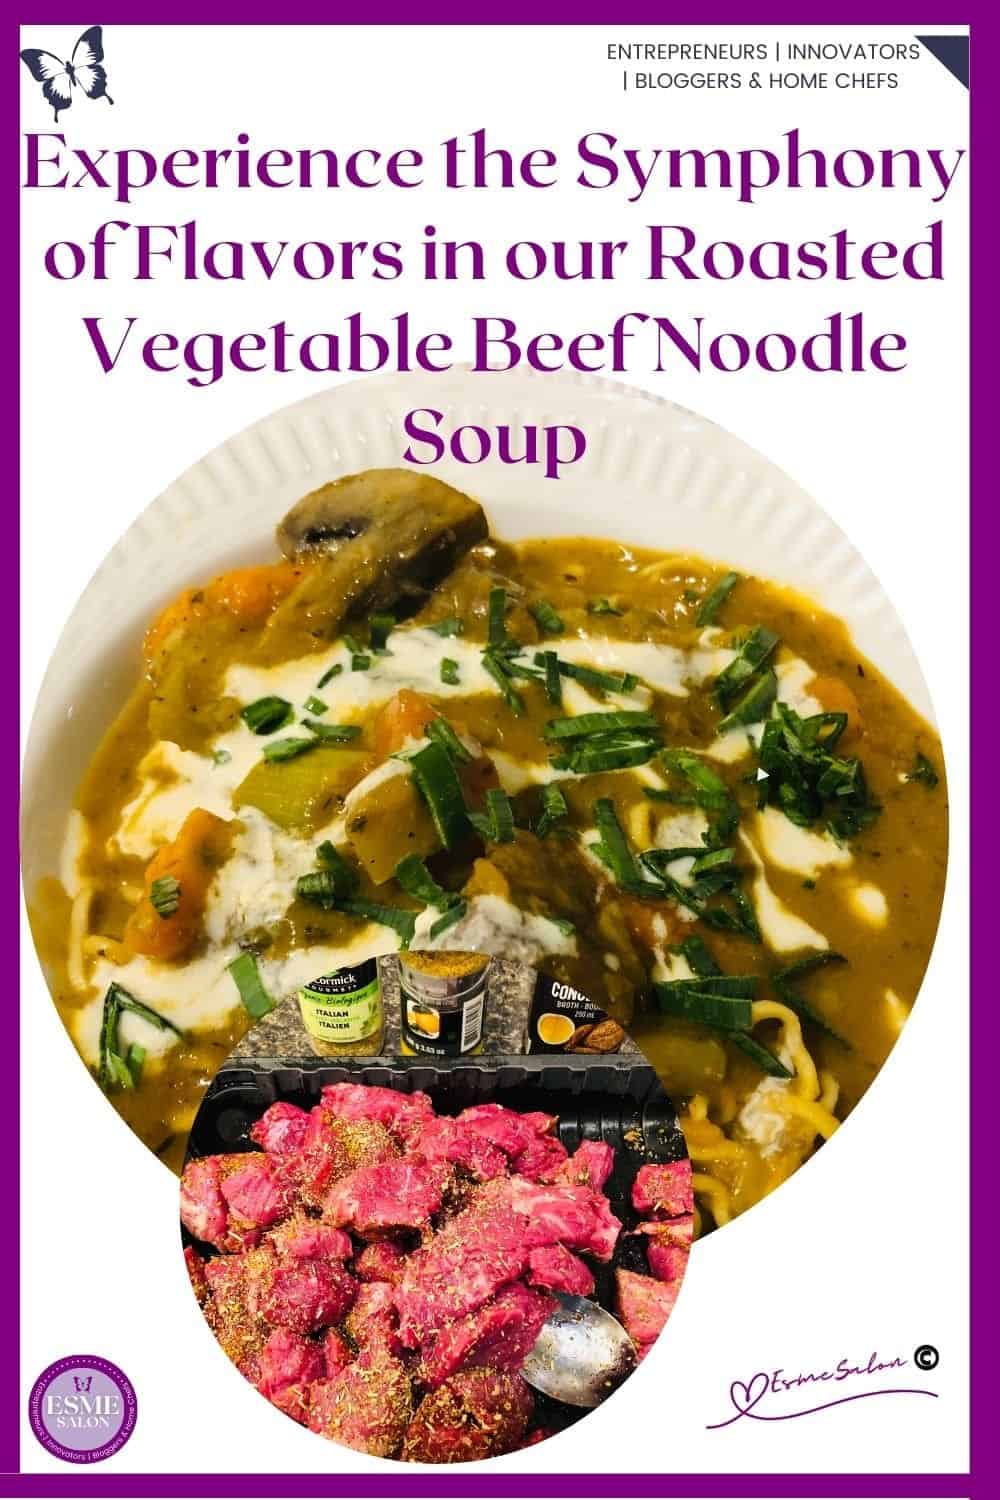 an image of a bowl of Roasted Vegetable Beef Noodle Soup decorated with cream and greens